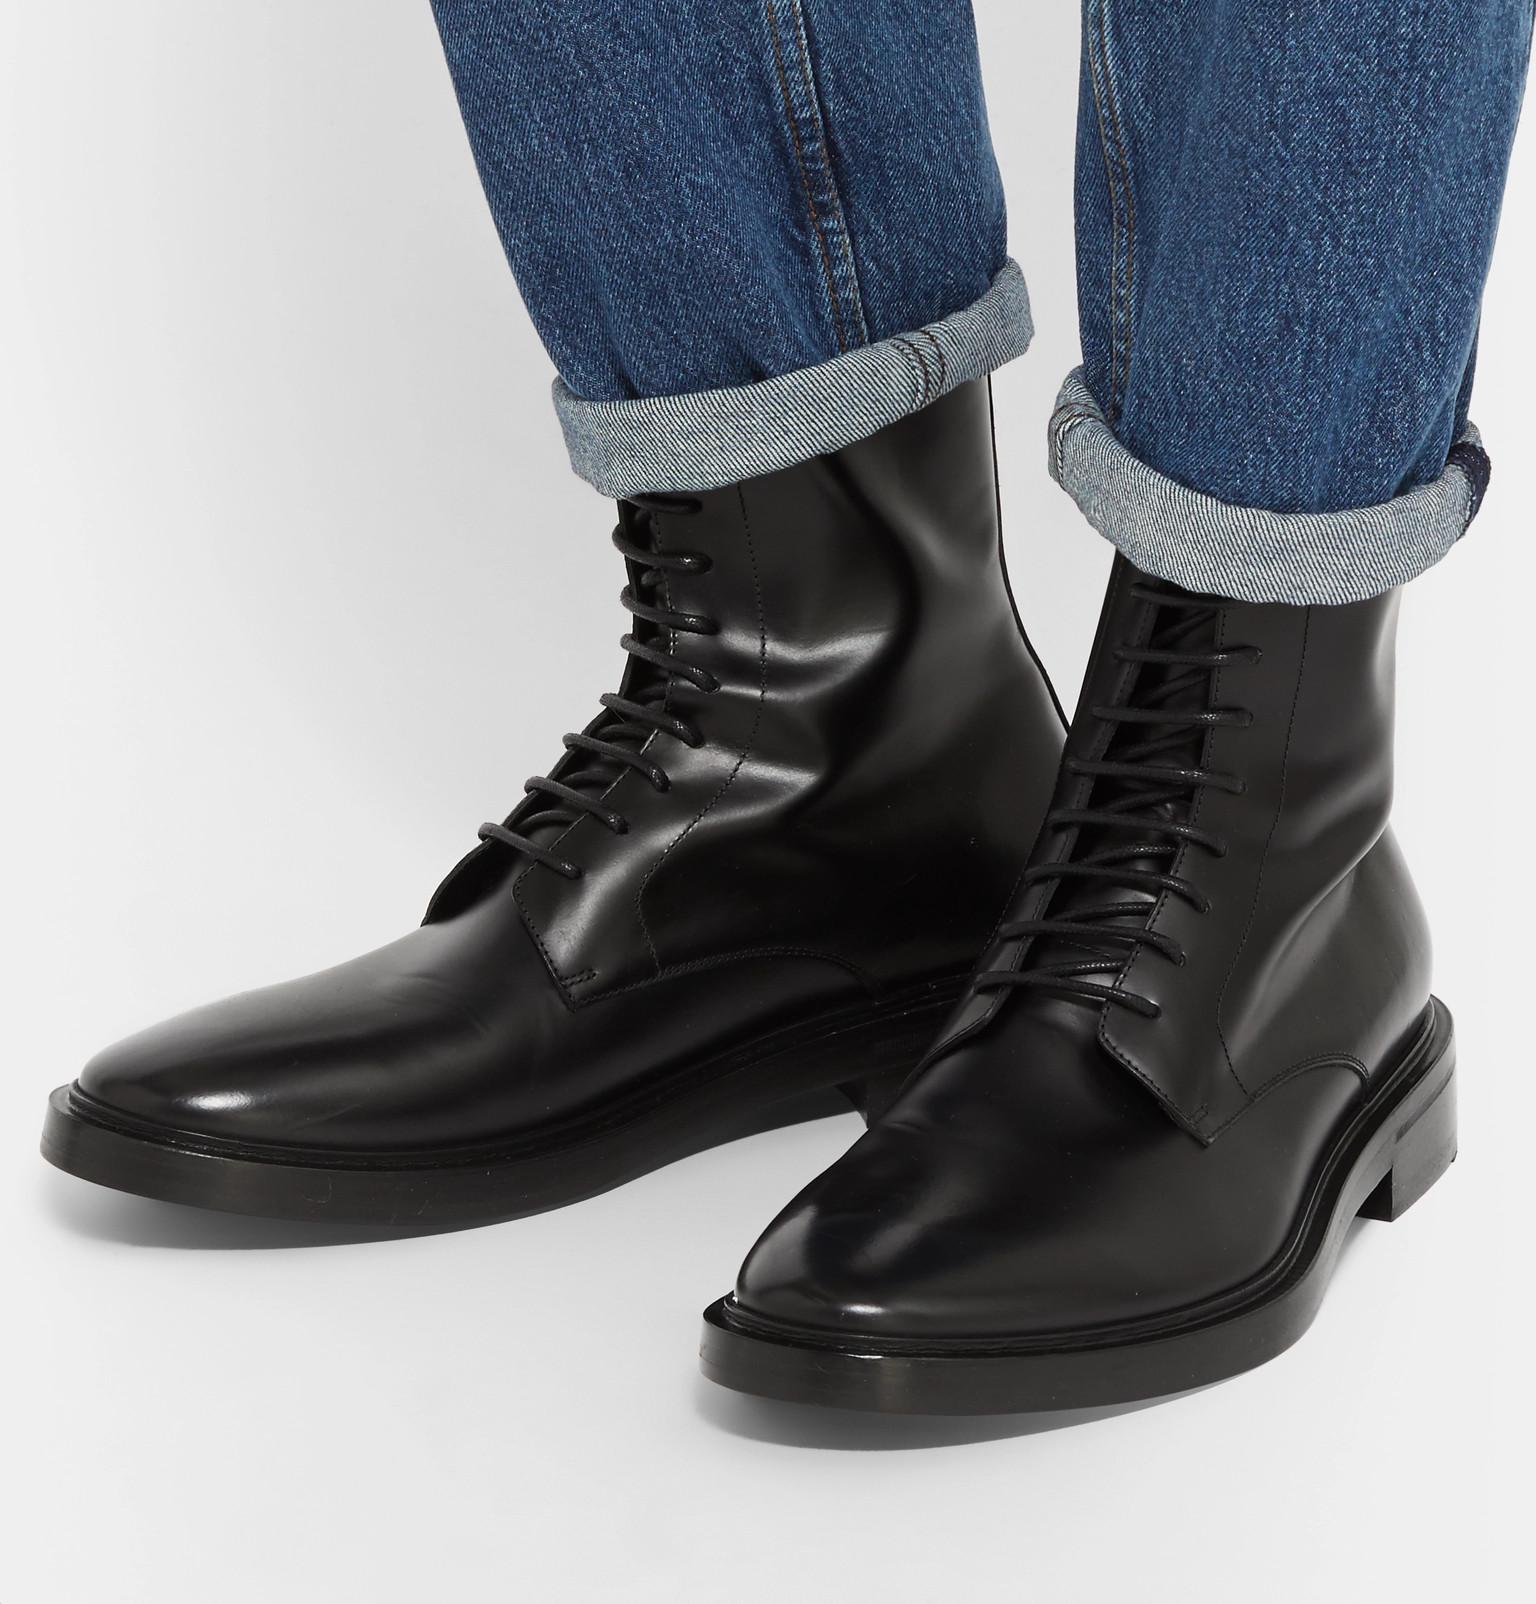 Balenciaga Leather Combat Boots in Black for Men - Lyst